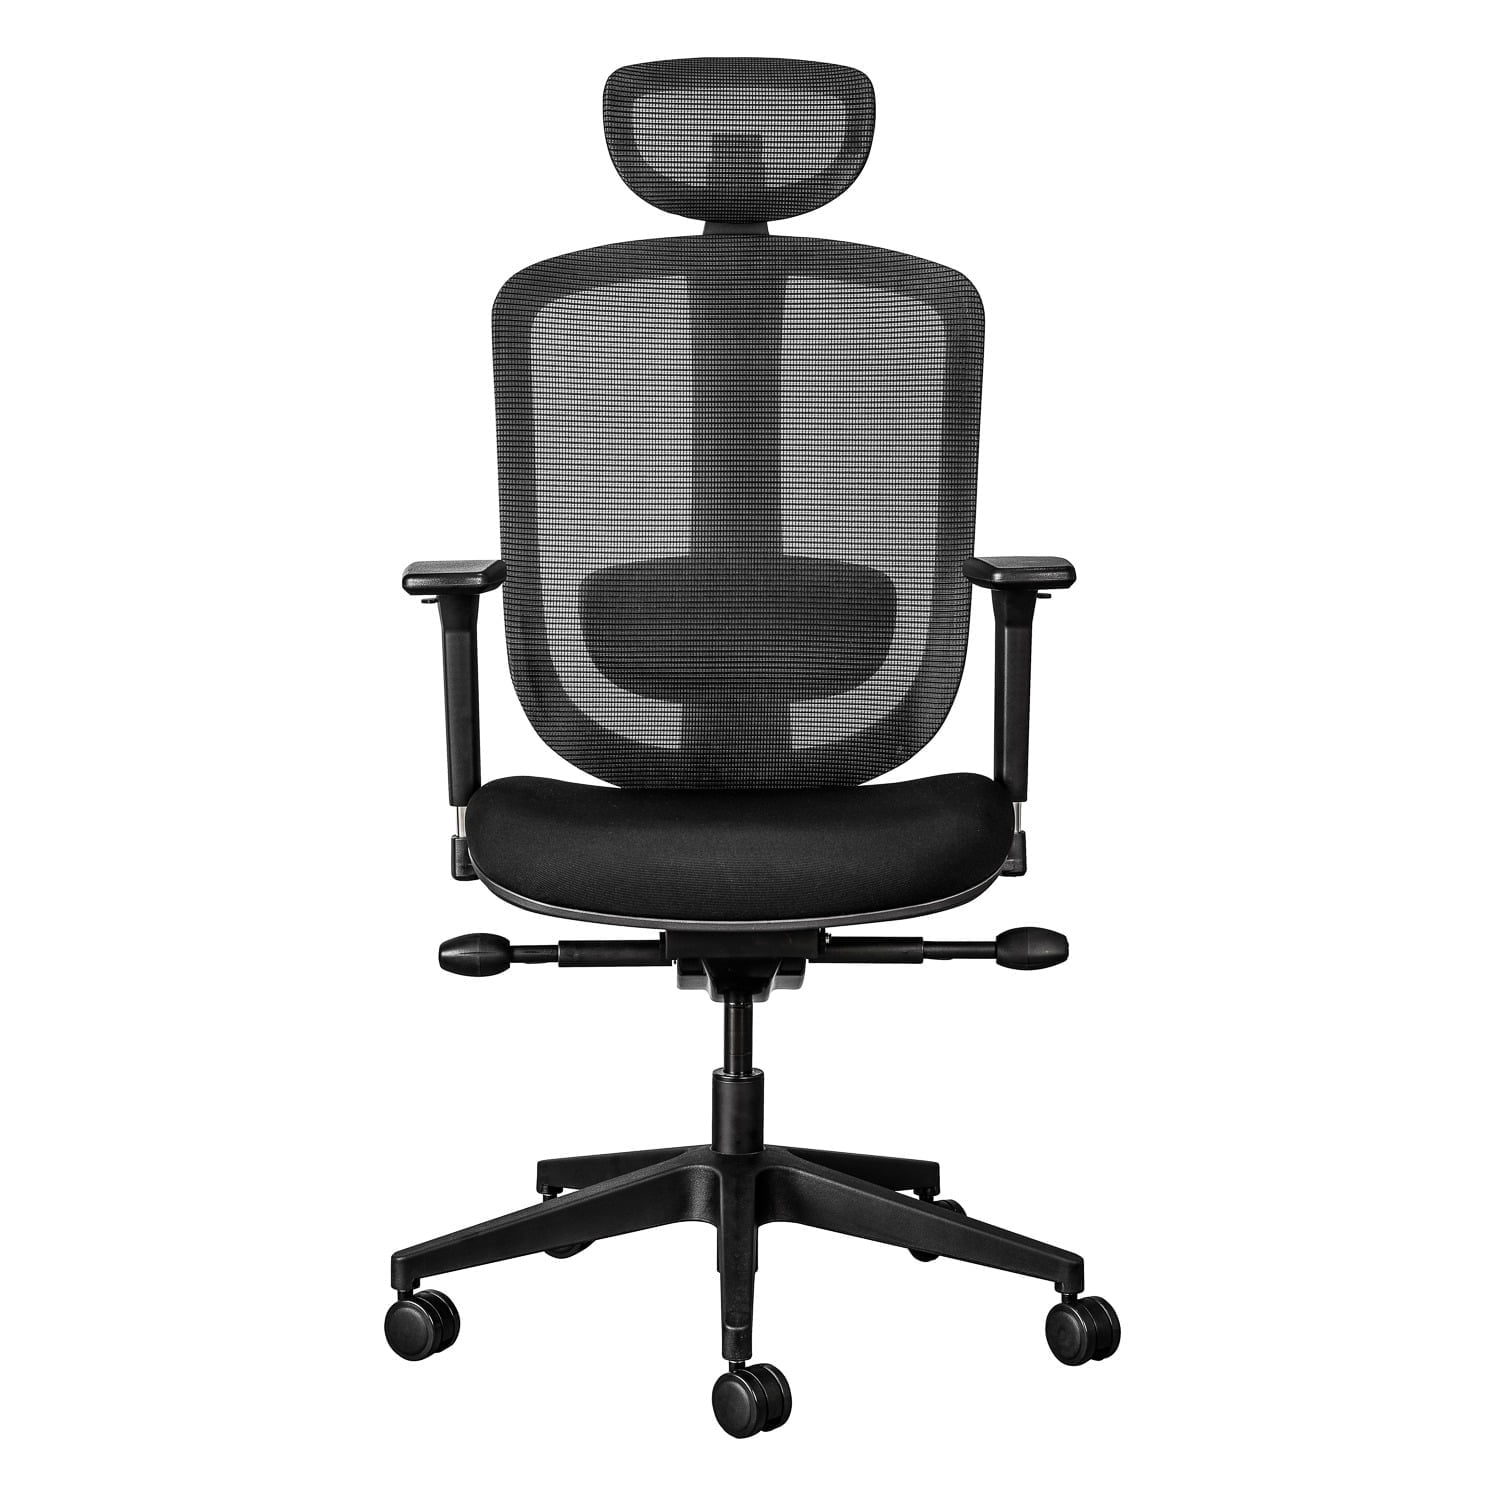 ergocurve executive ergonomic office chair with headrest available in South Africa at a good price